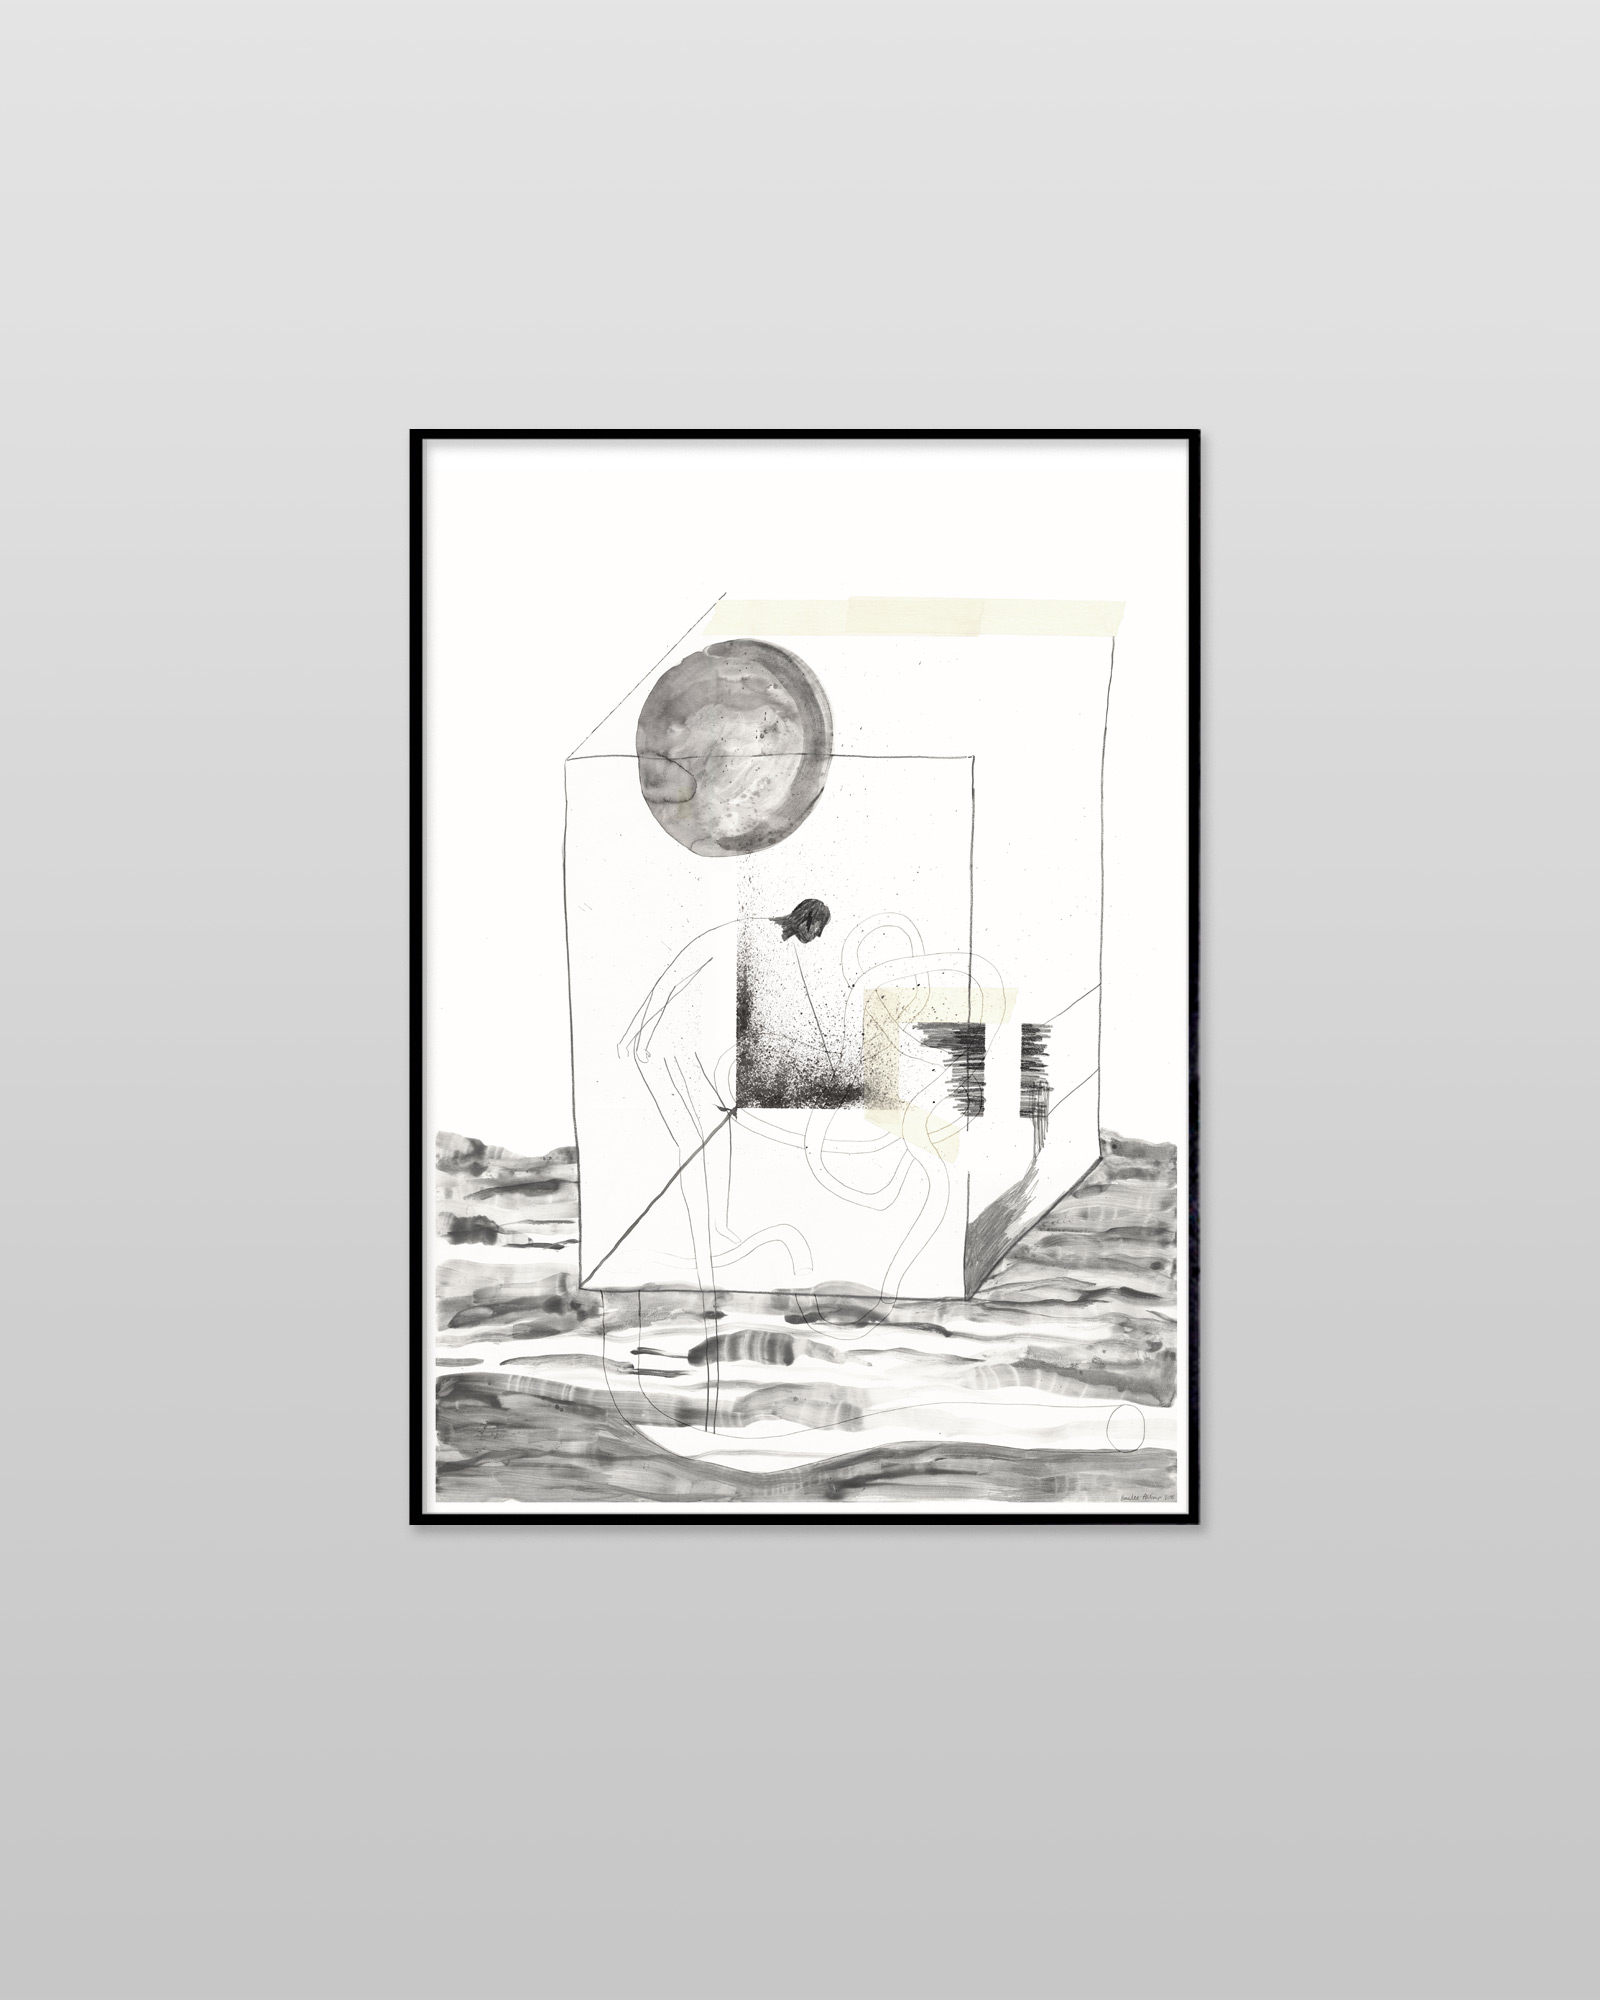 posters-prints, giclee-print, aesthetic, landscape, minimalistic, monochrome, surrealistic, architecture, bodies, nature, black, white, ink, paper, black-and-white, contemporary-art, danish, decorative, design, interior, interior-design, modern, modern-art, nordic, posters, prints, scandinavien, Buy original high quality art. Paintings, drawings, limited edition prints & posters by talented artists.